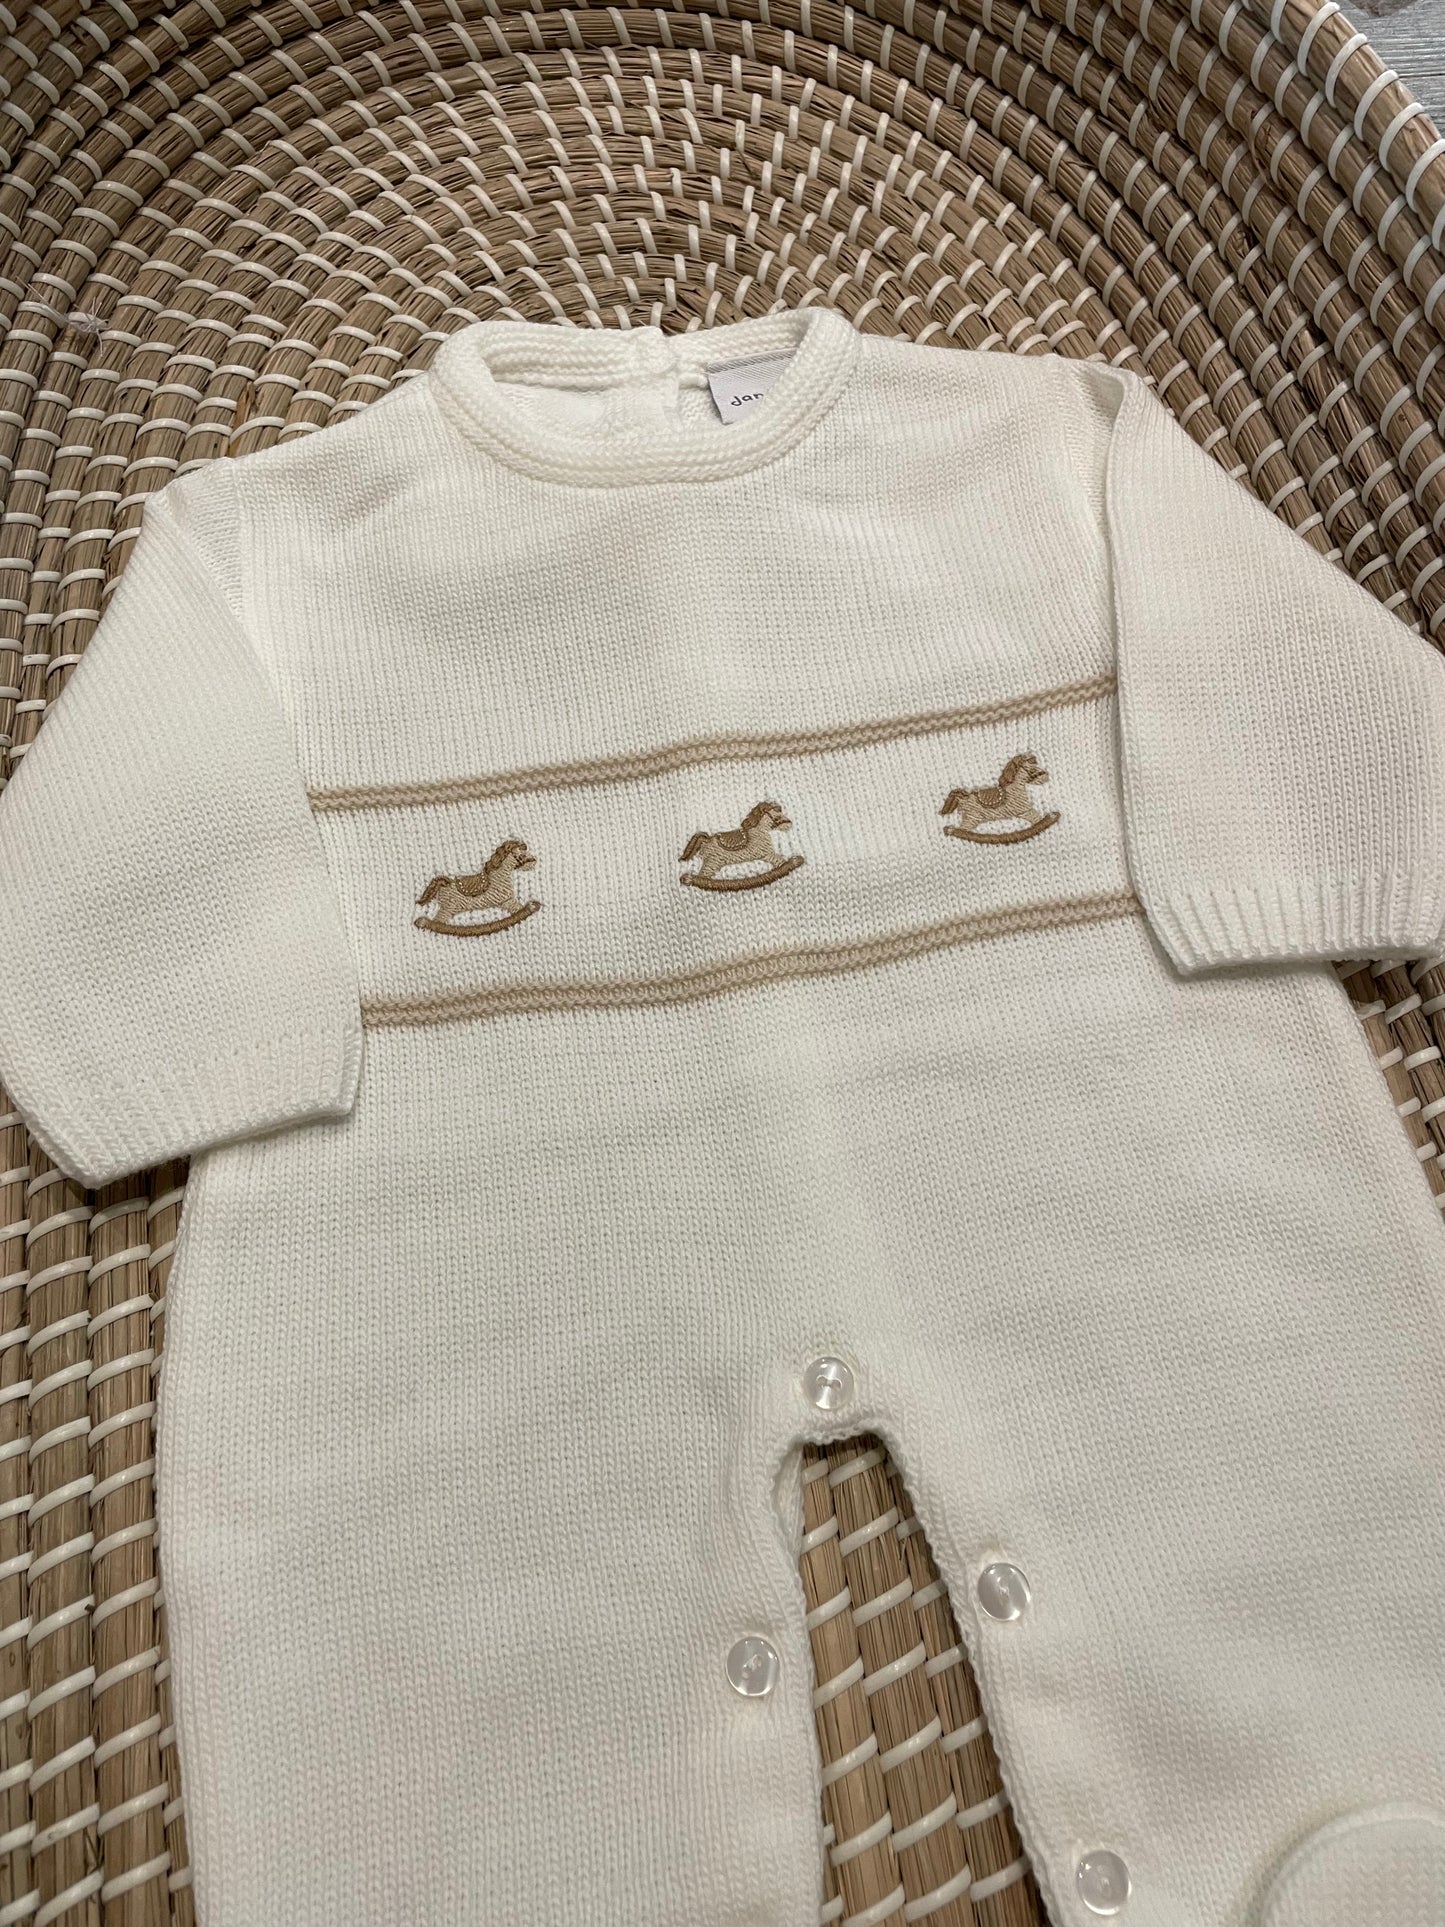 The rocking horse knitted onesie